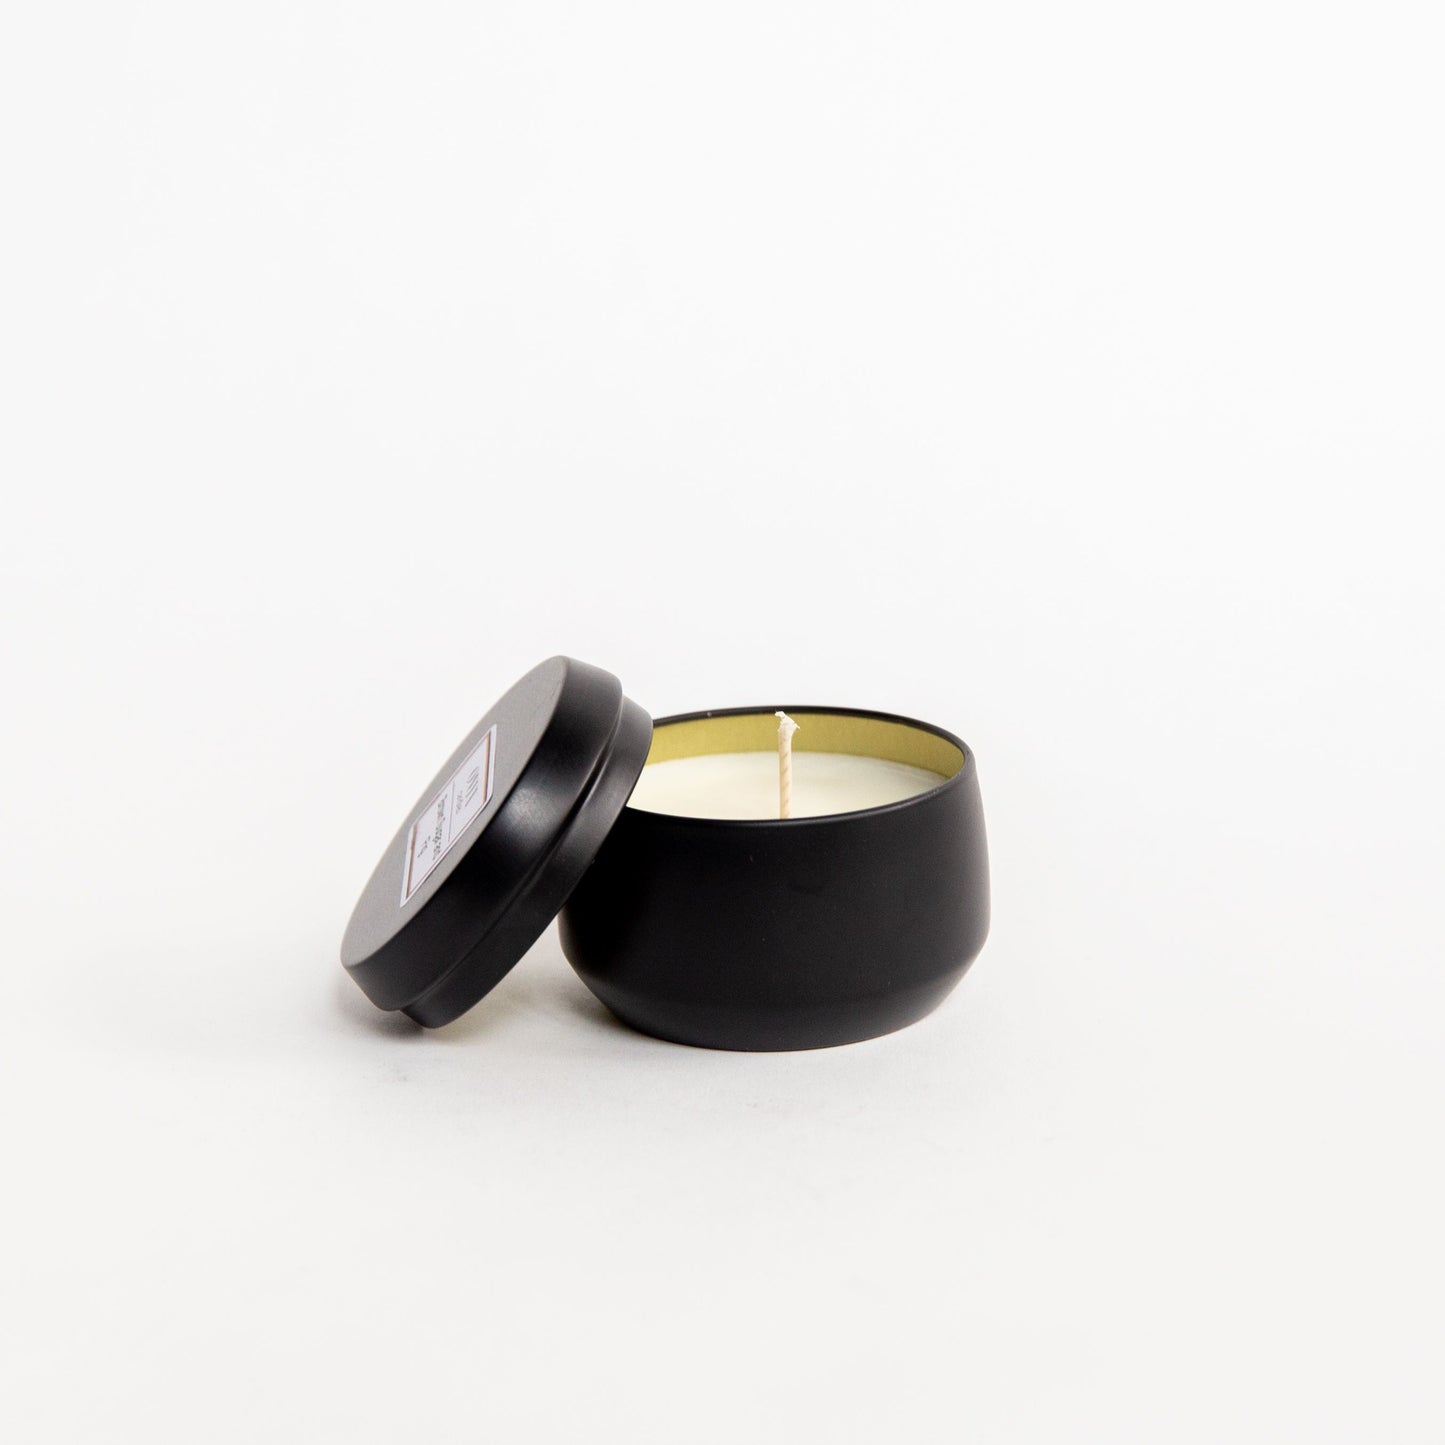 Pictured is the 4 oz matte black tin candle option in the scent of Cedar and Balsam